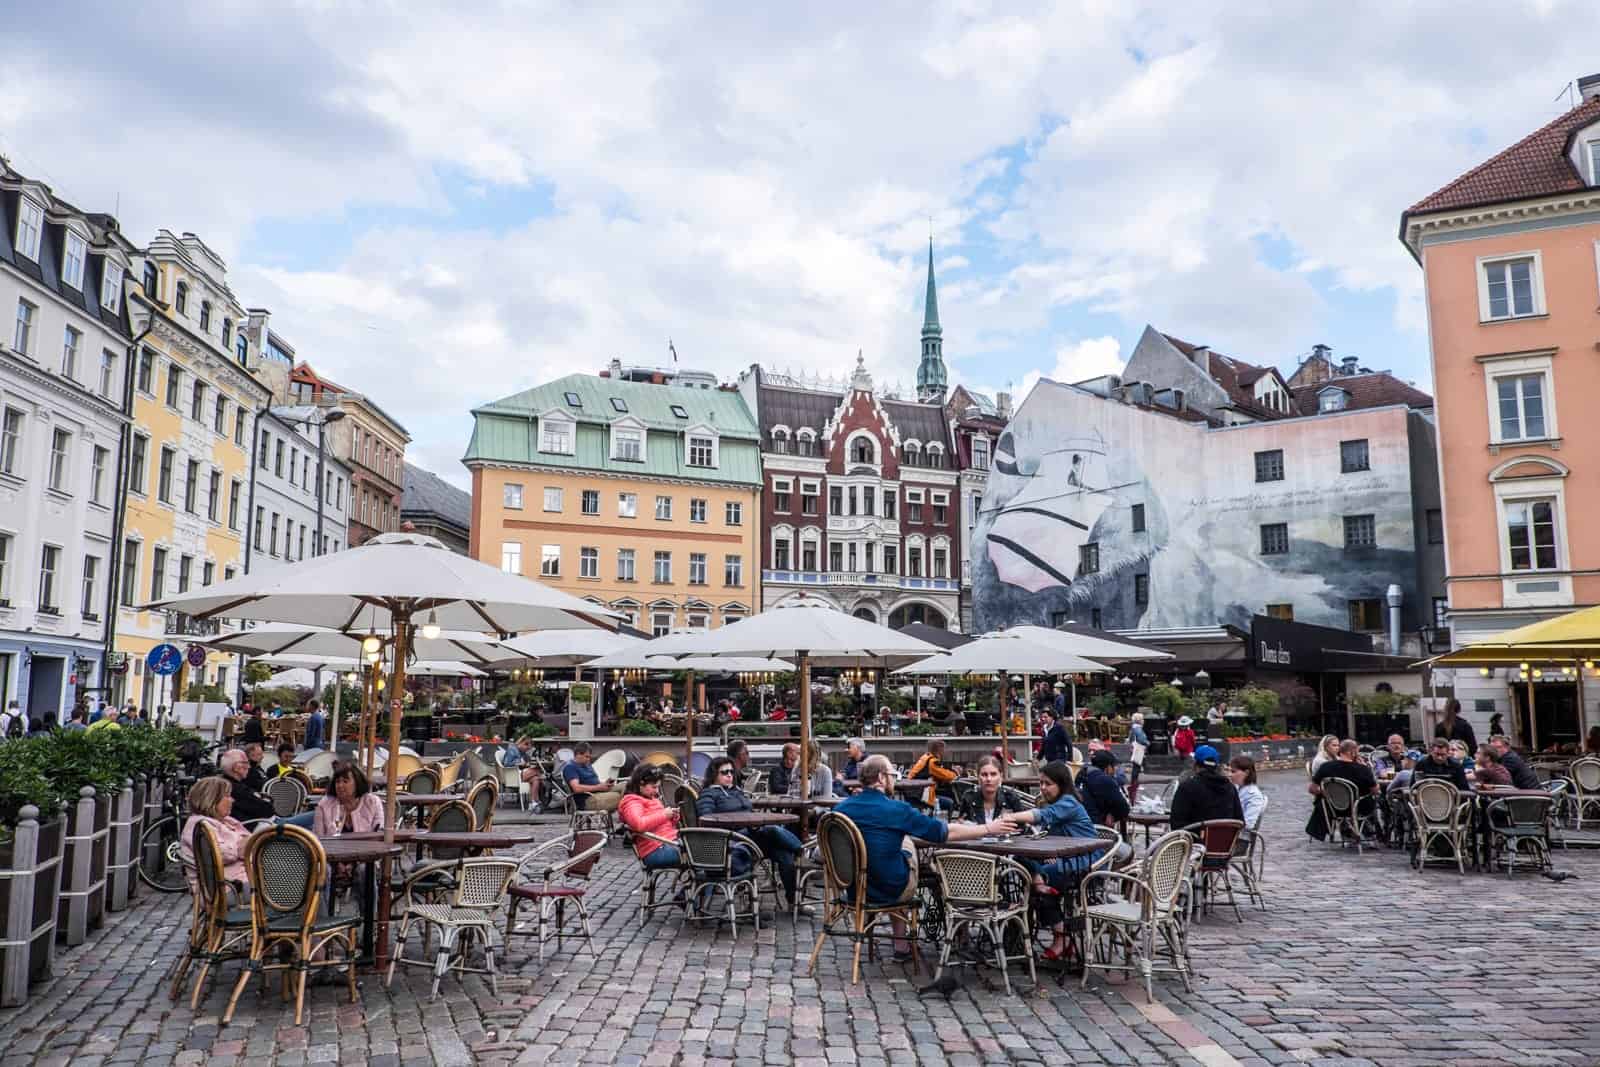 The main square of Riga Old Town where people dine outside 